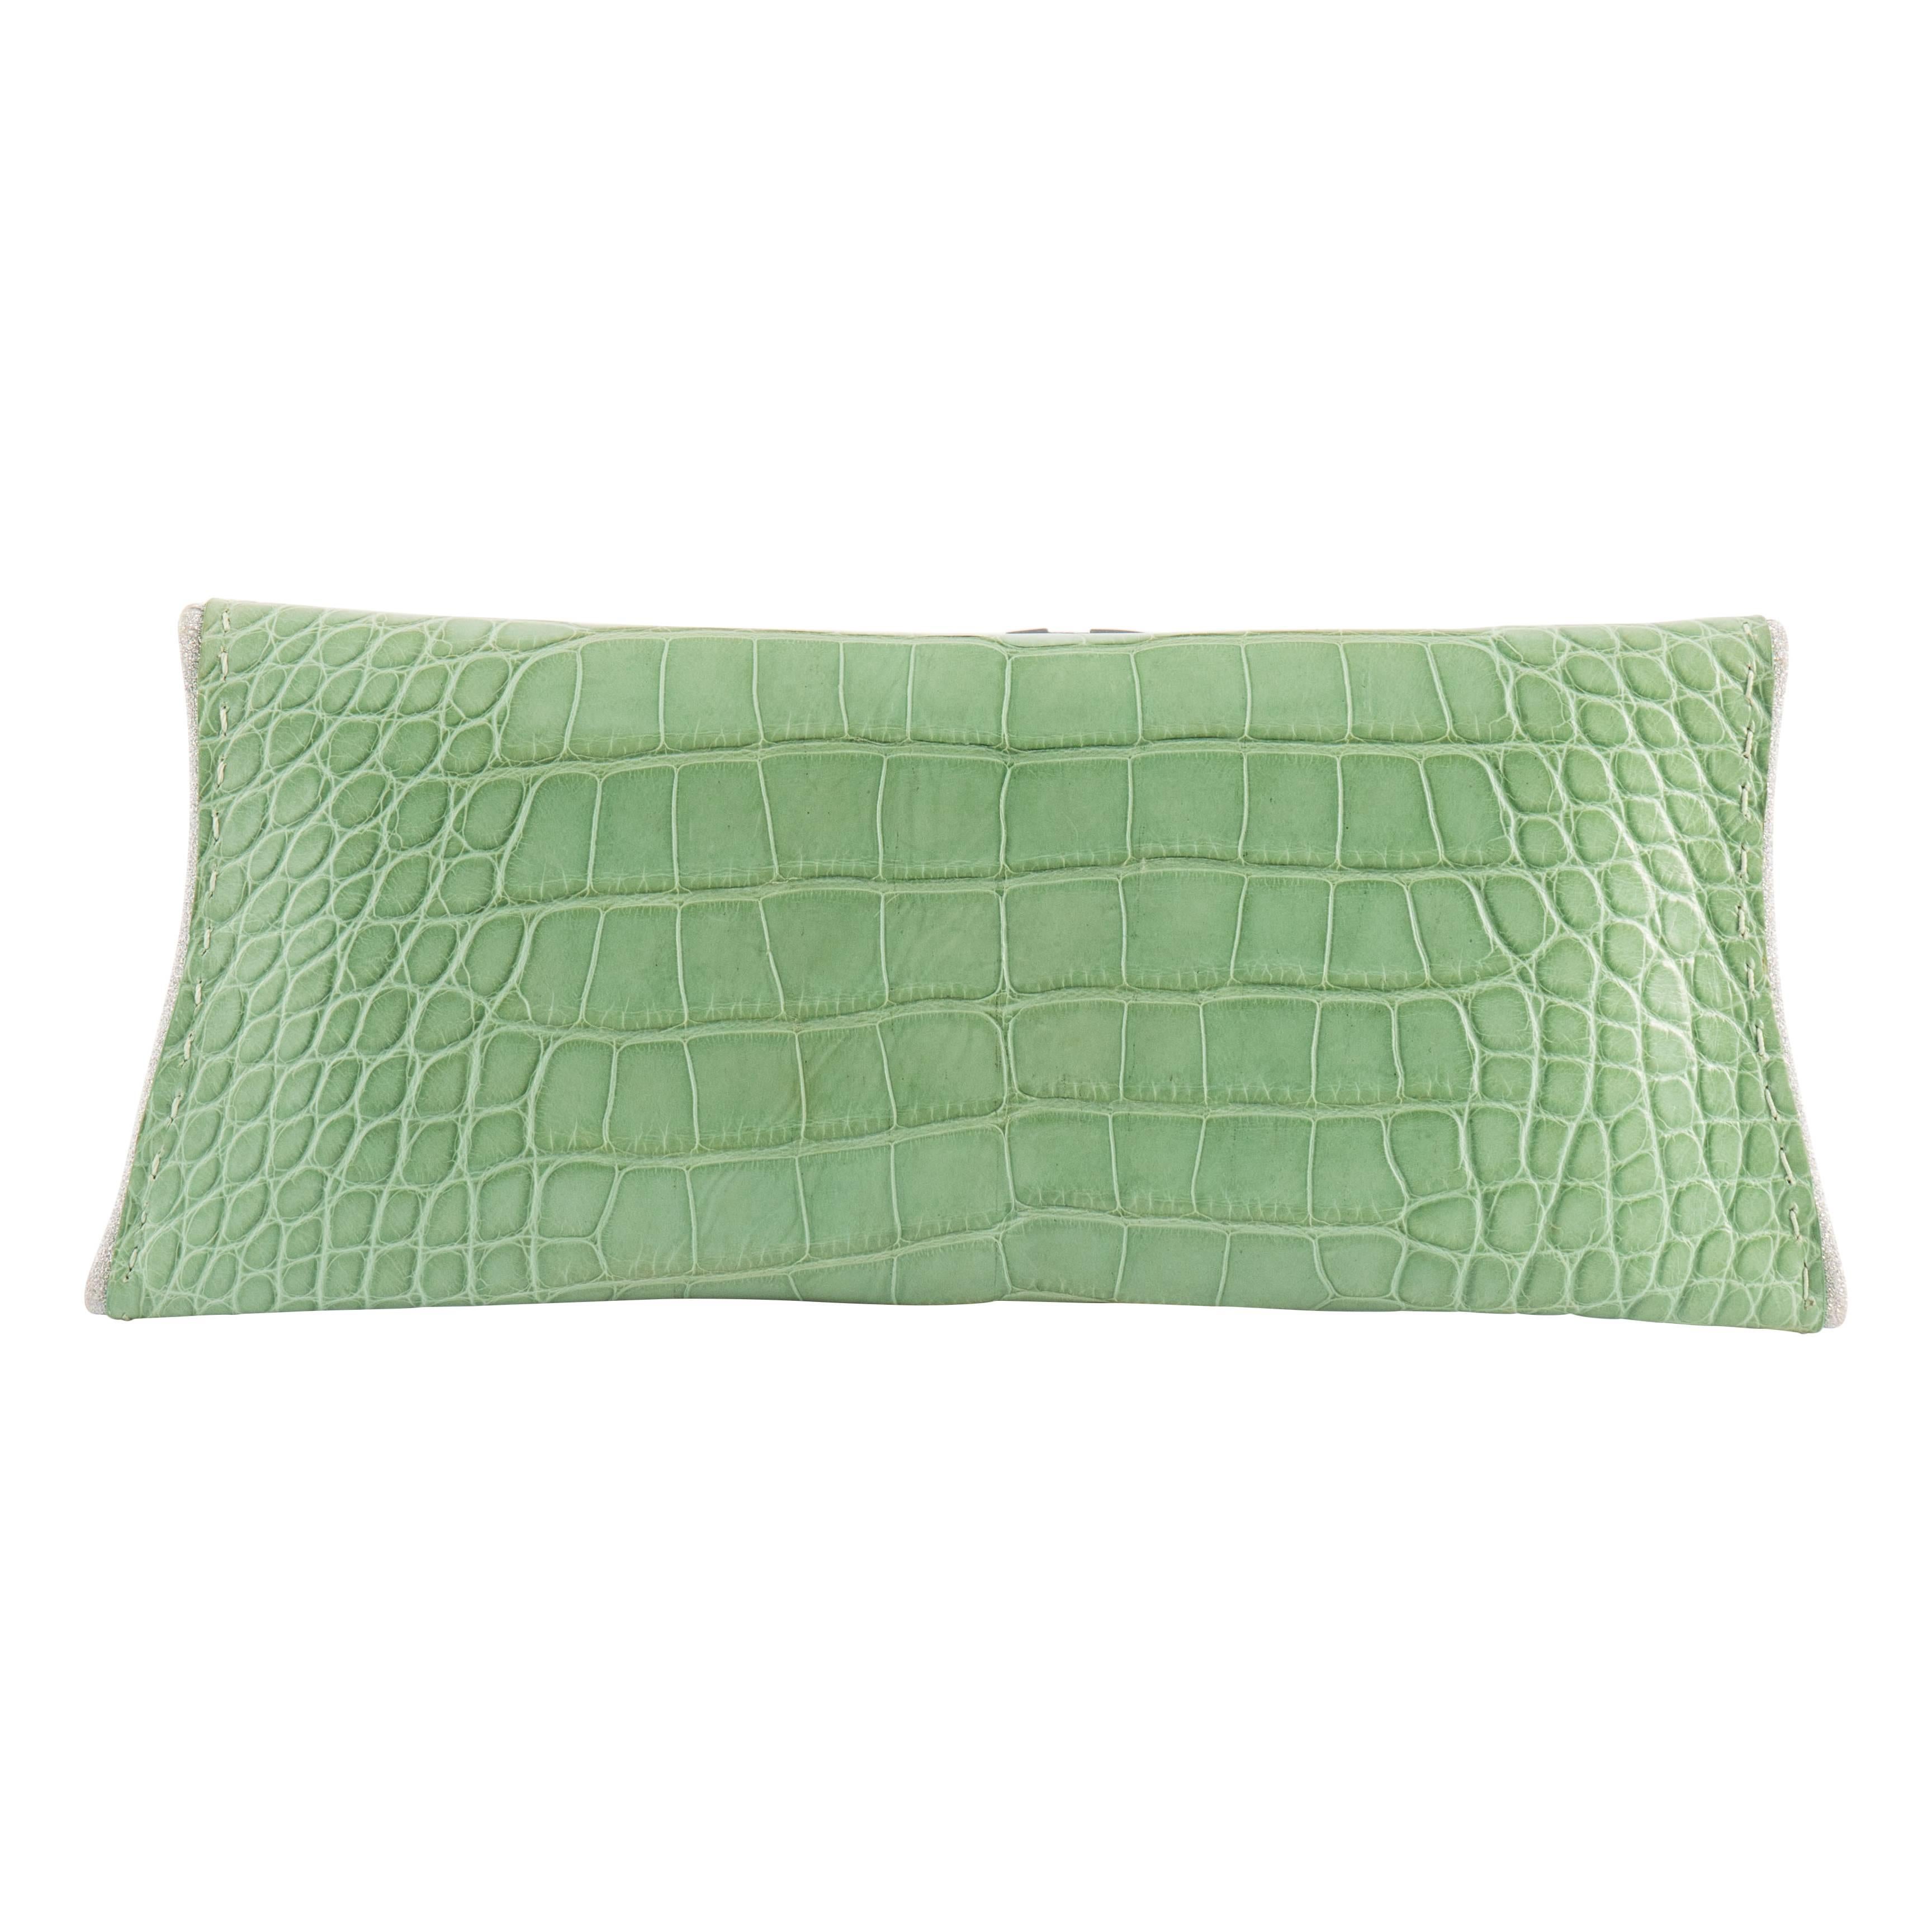 VBH Manila Stretch Clutch in Shiny Aquagreen Crocodile and Silver Sparkle Border In New Condition For Sale In New York, NY